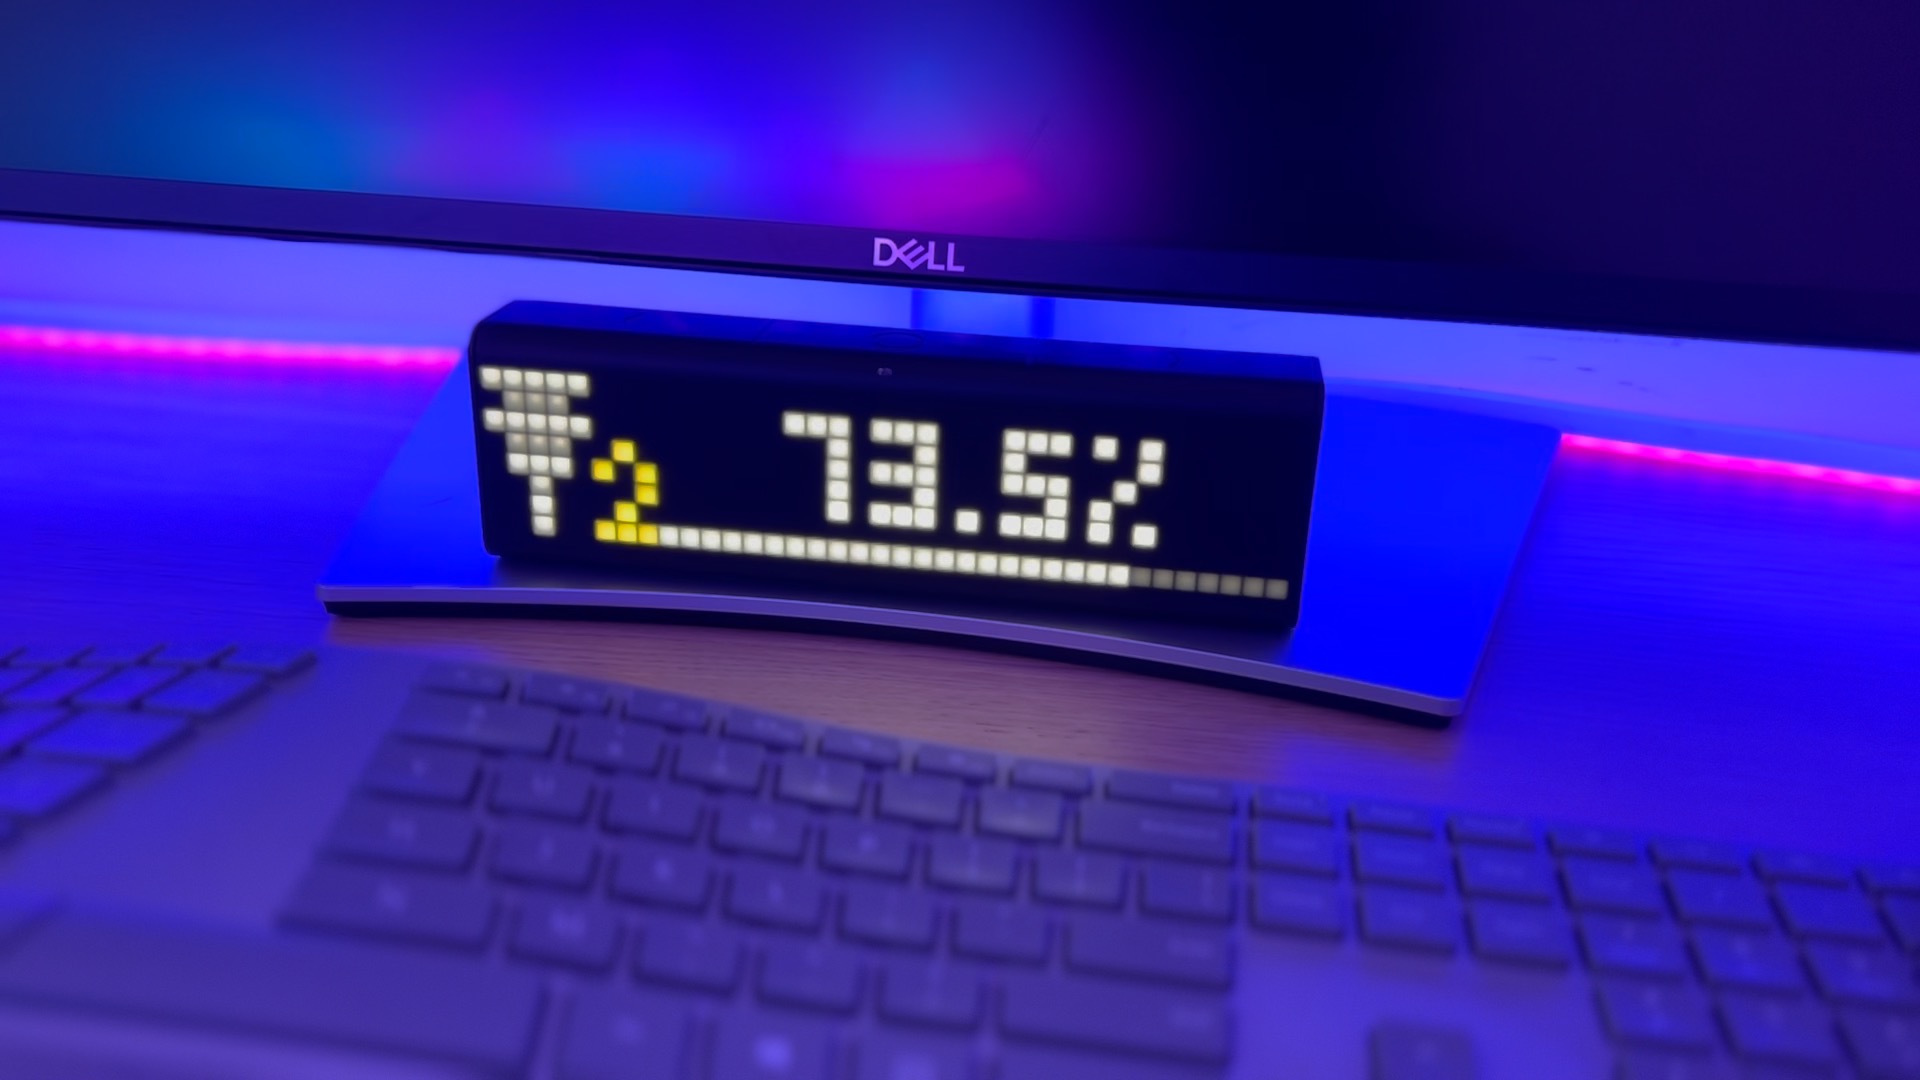 Smart display showing a syringe icon with the number 2 with a percentage of 73.5